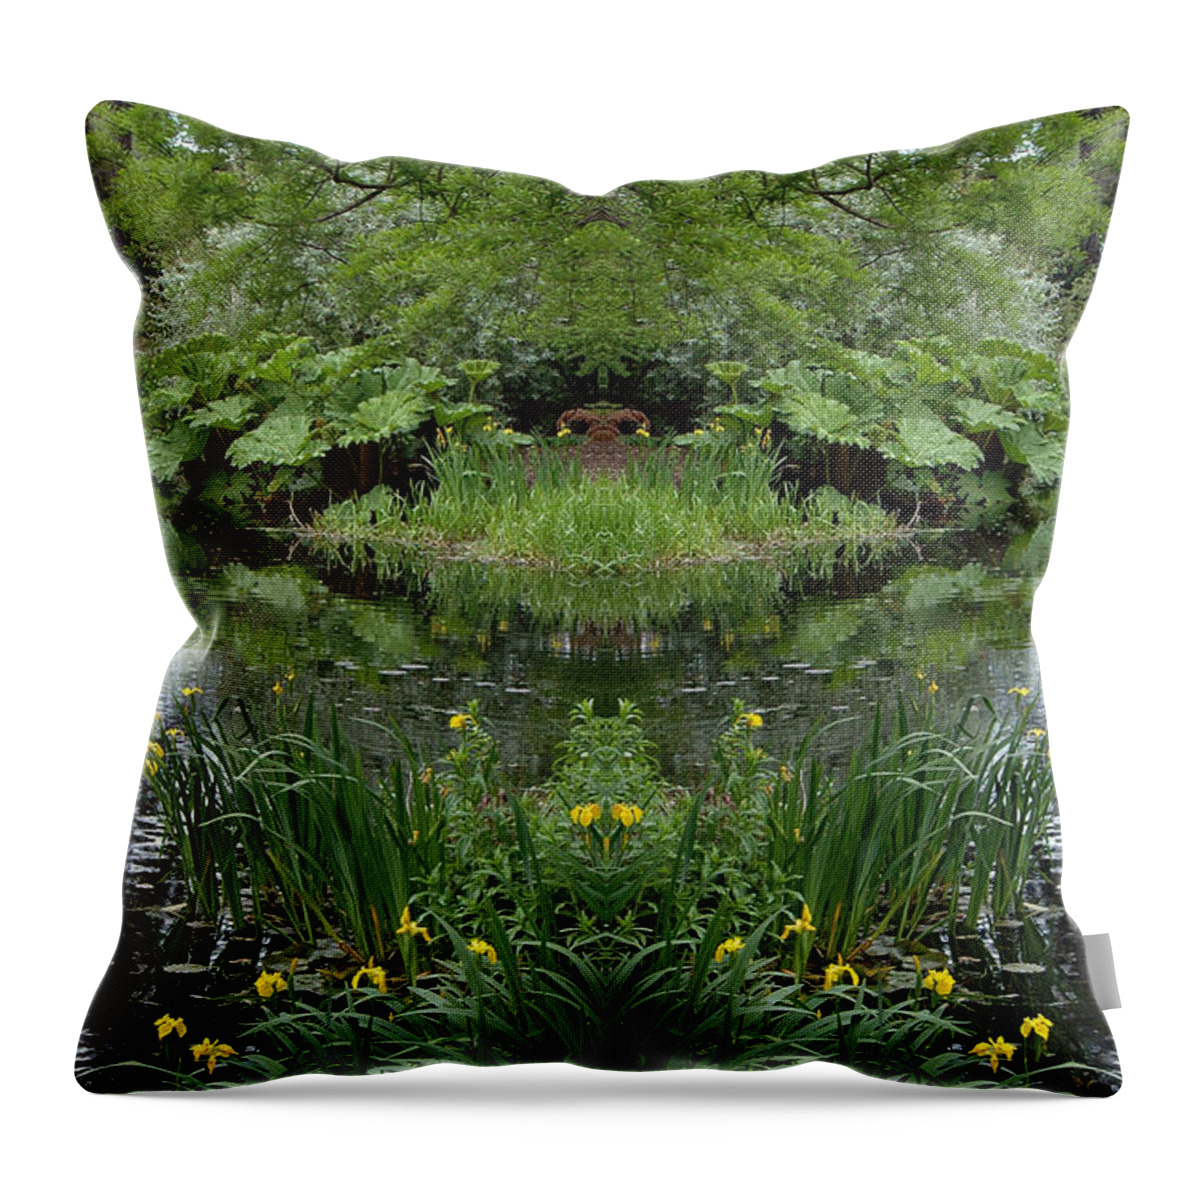  Throw Pillow featuring the photograph Creation 67 by Mike Nellums